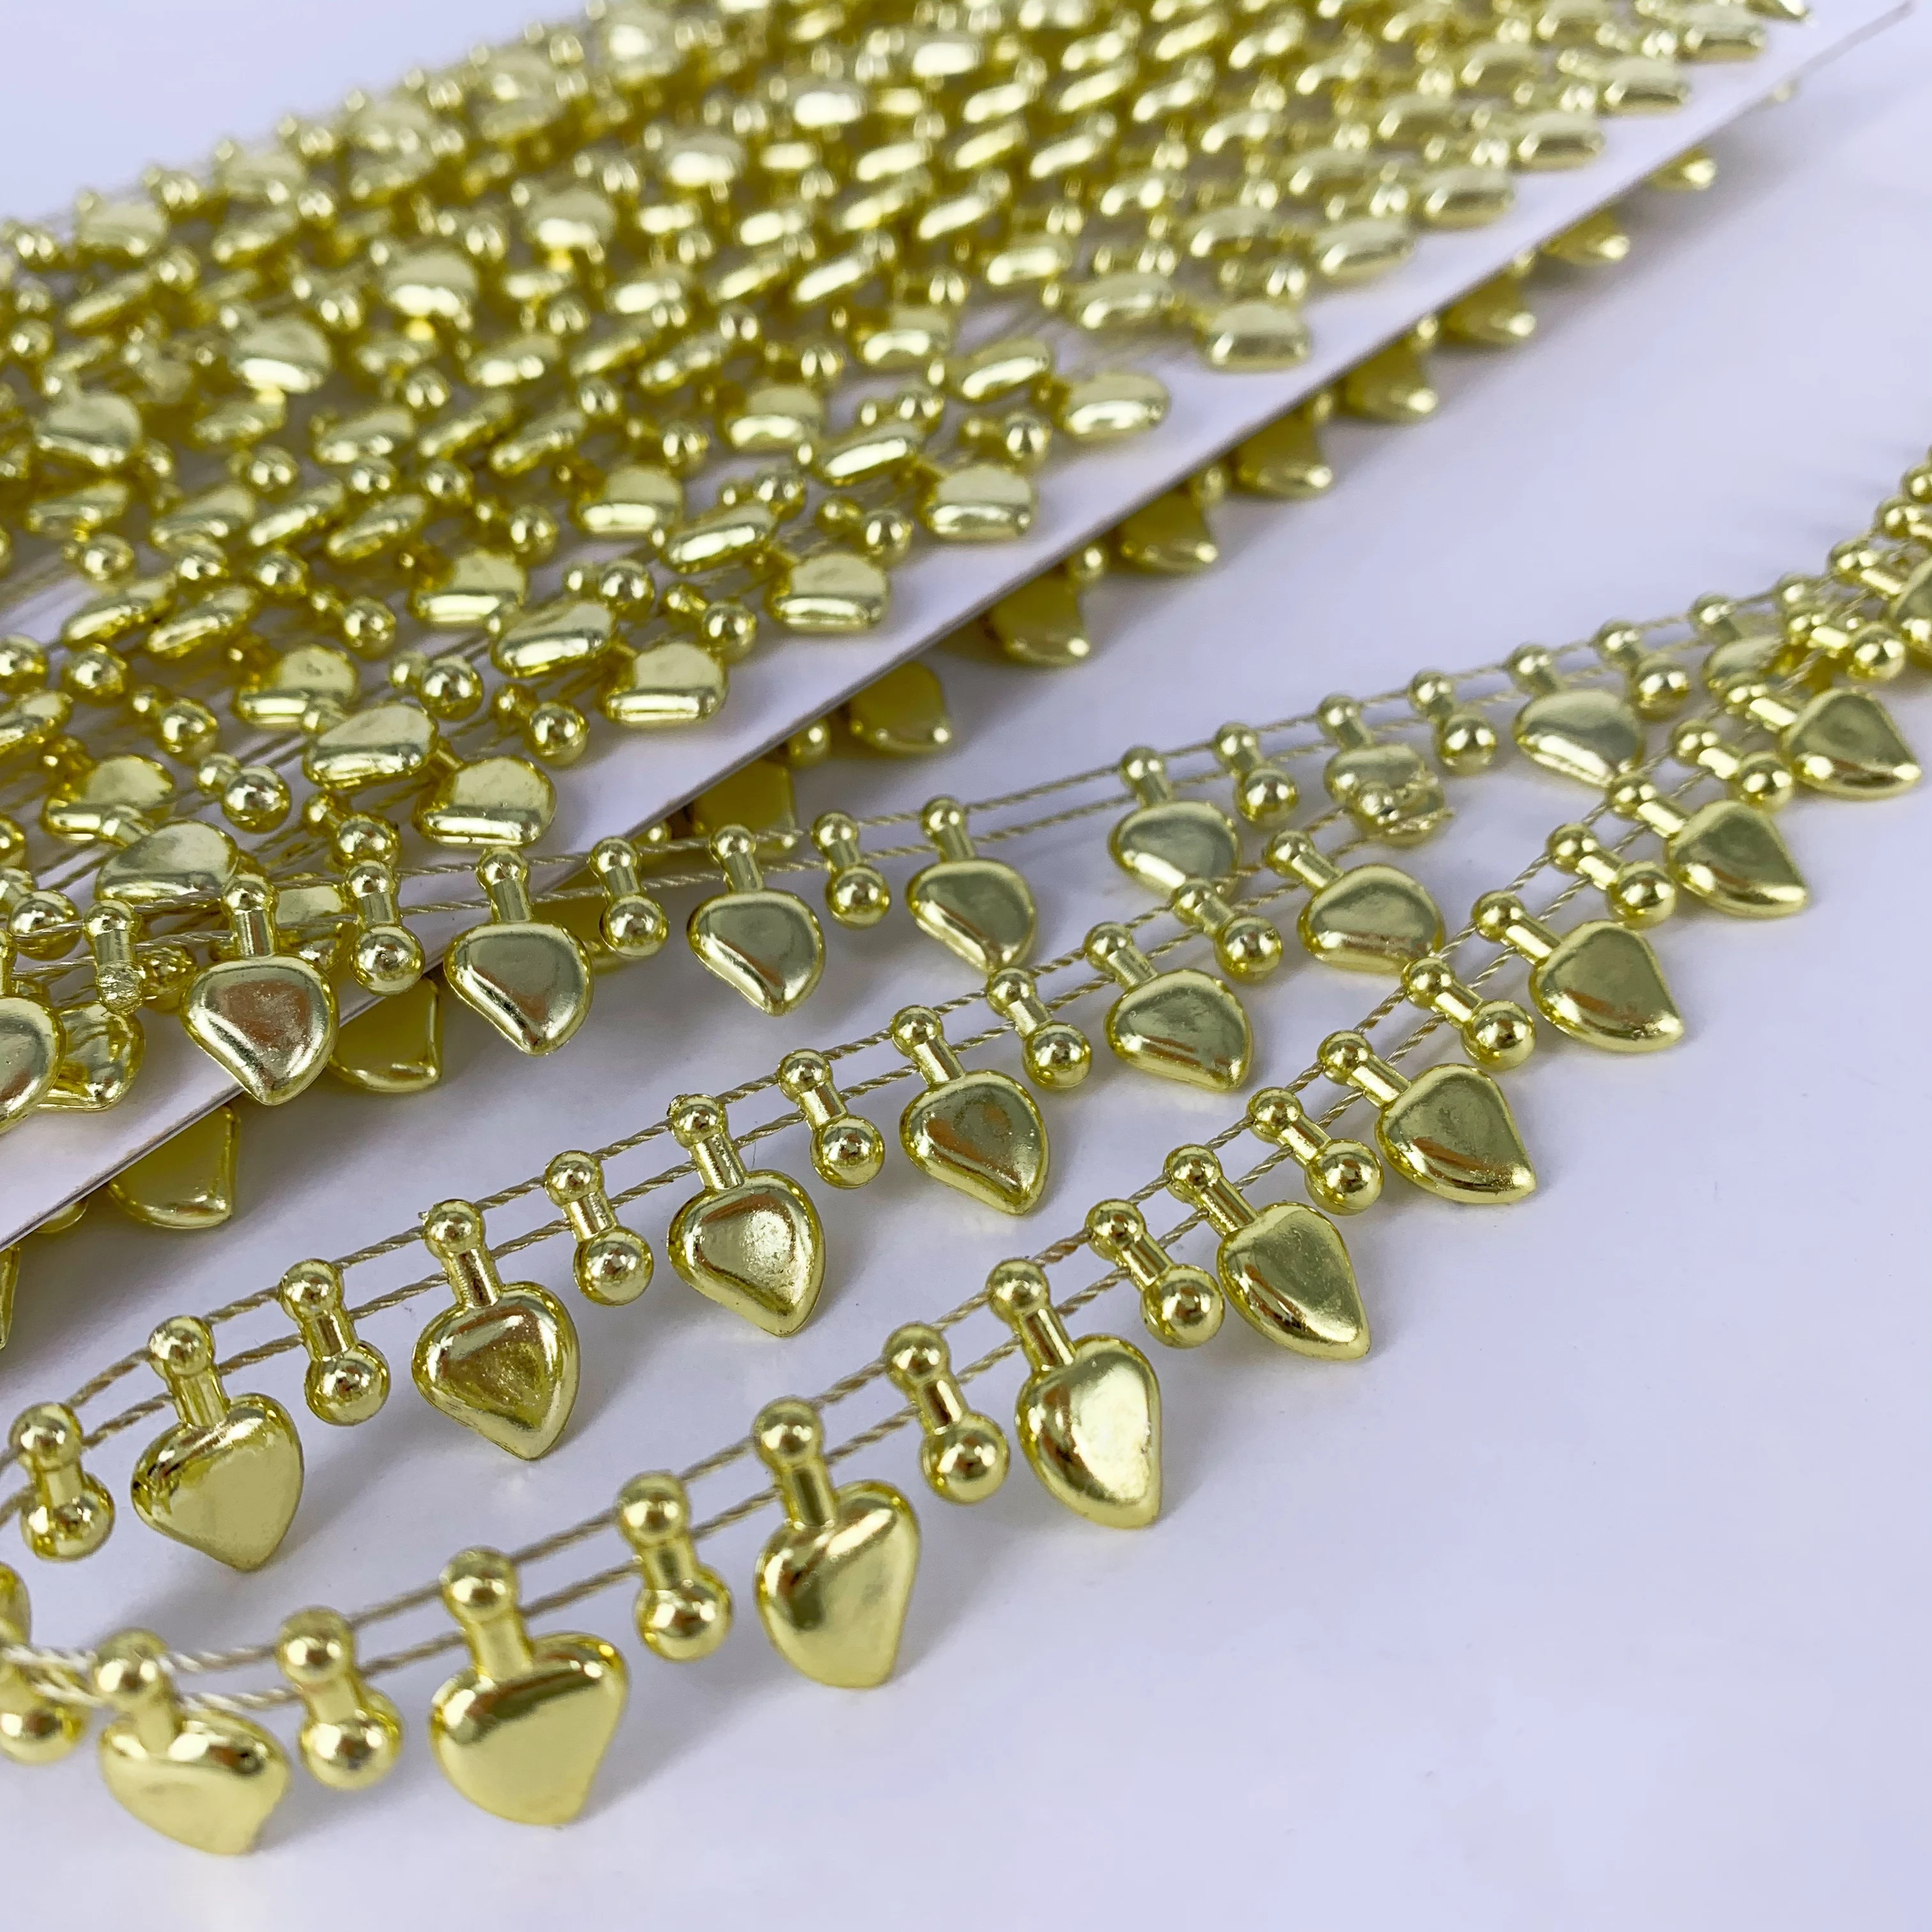 Hot sale Heart Shaped Beads rolls Chain String plastic beads for clothing Wedding Party Decorations